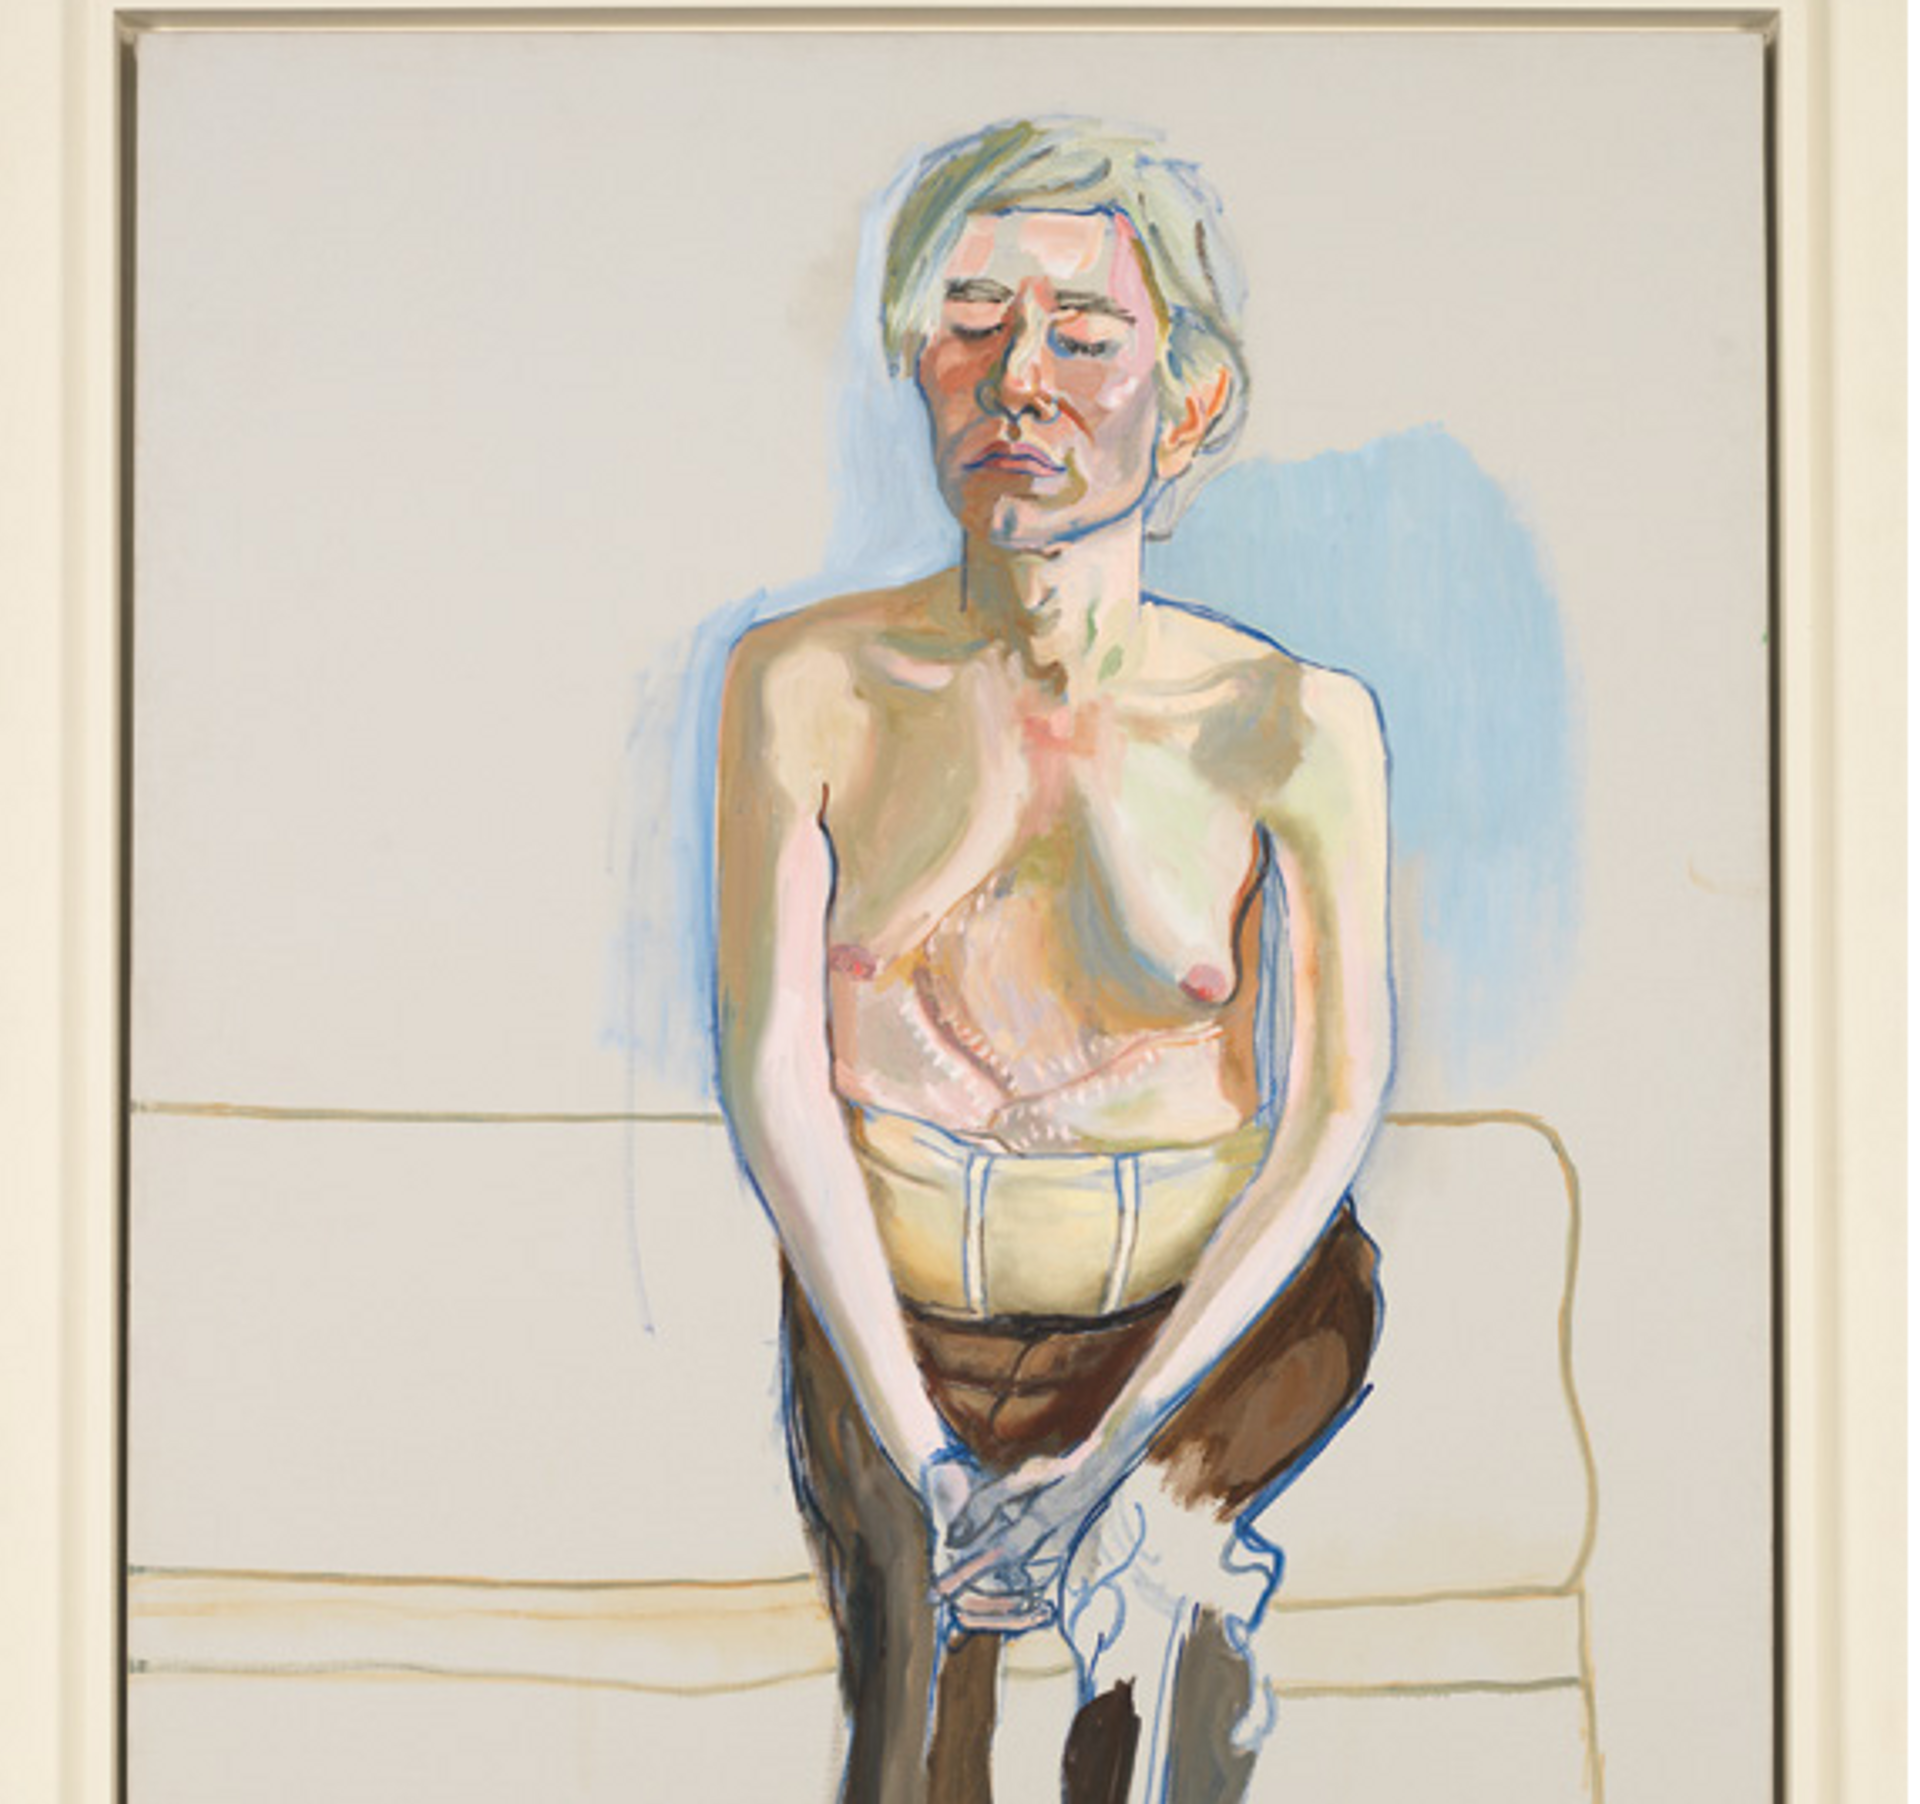 Alice Neel, Andy Warhol, 1970, huile sur toile, Whitney Museum of American Art, New York. © The Estate of Alice Neel, courtesy David Zwirner. Photo Scala